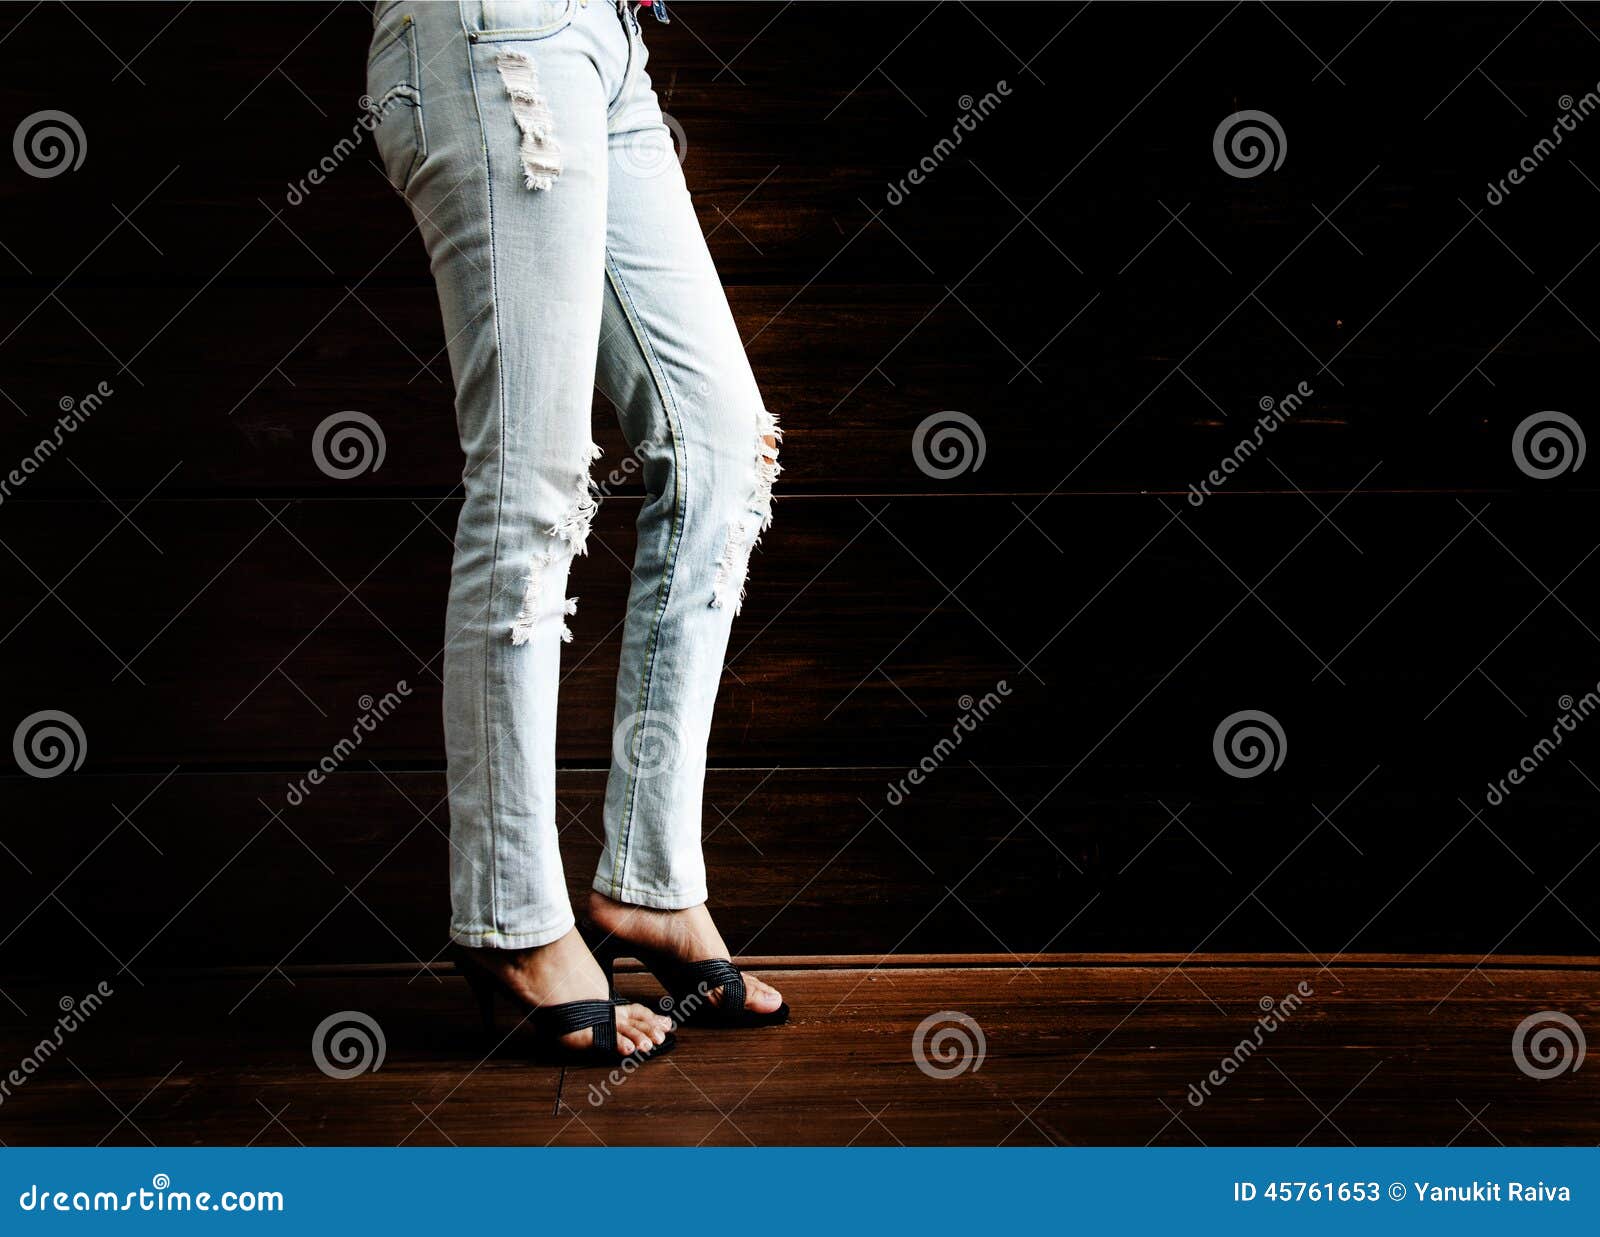 Lady Leg With Jeans At Wood Bar At Night Club Stock Image - Image of ...